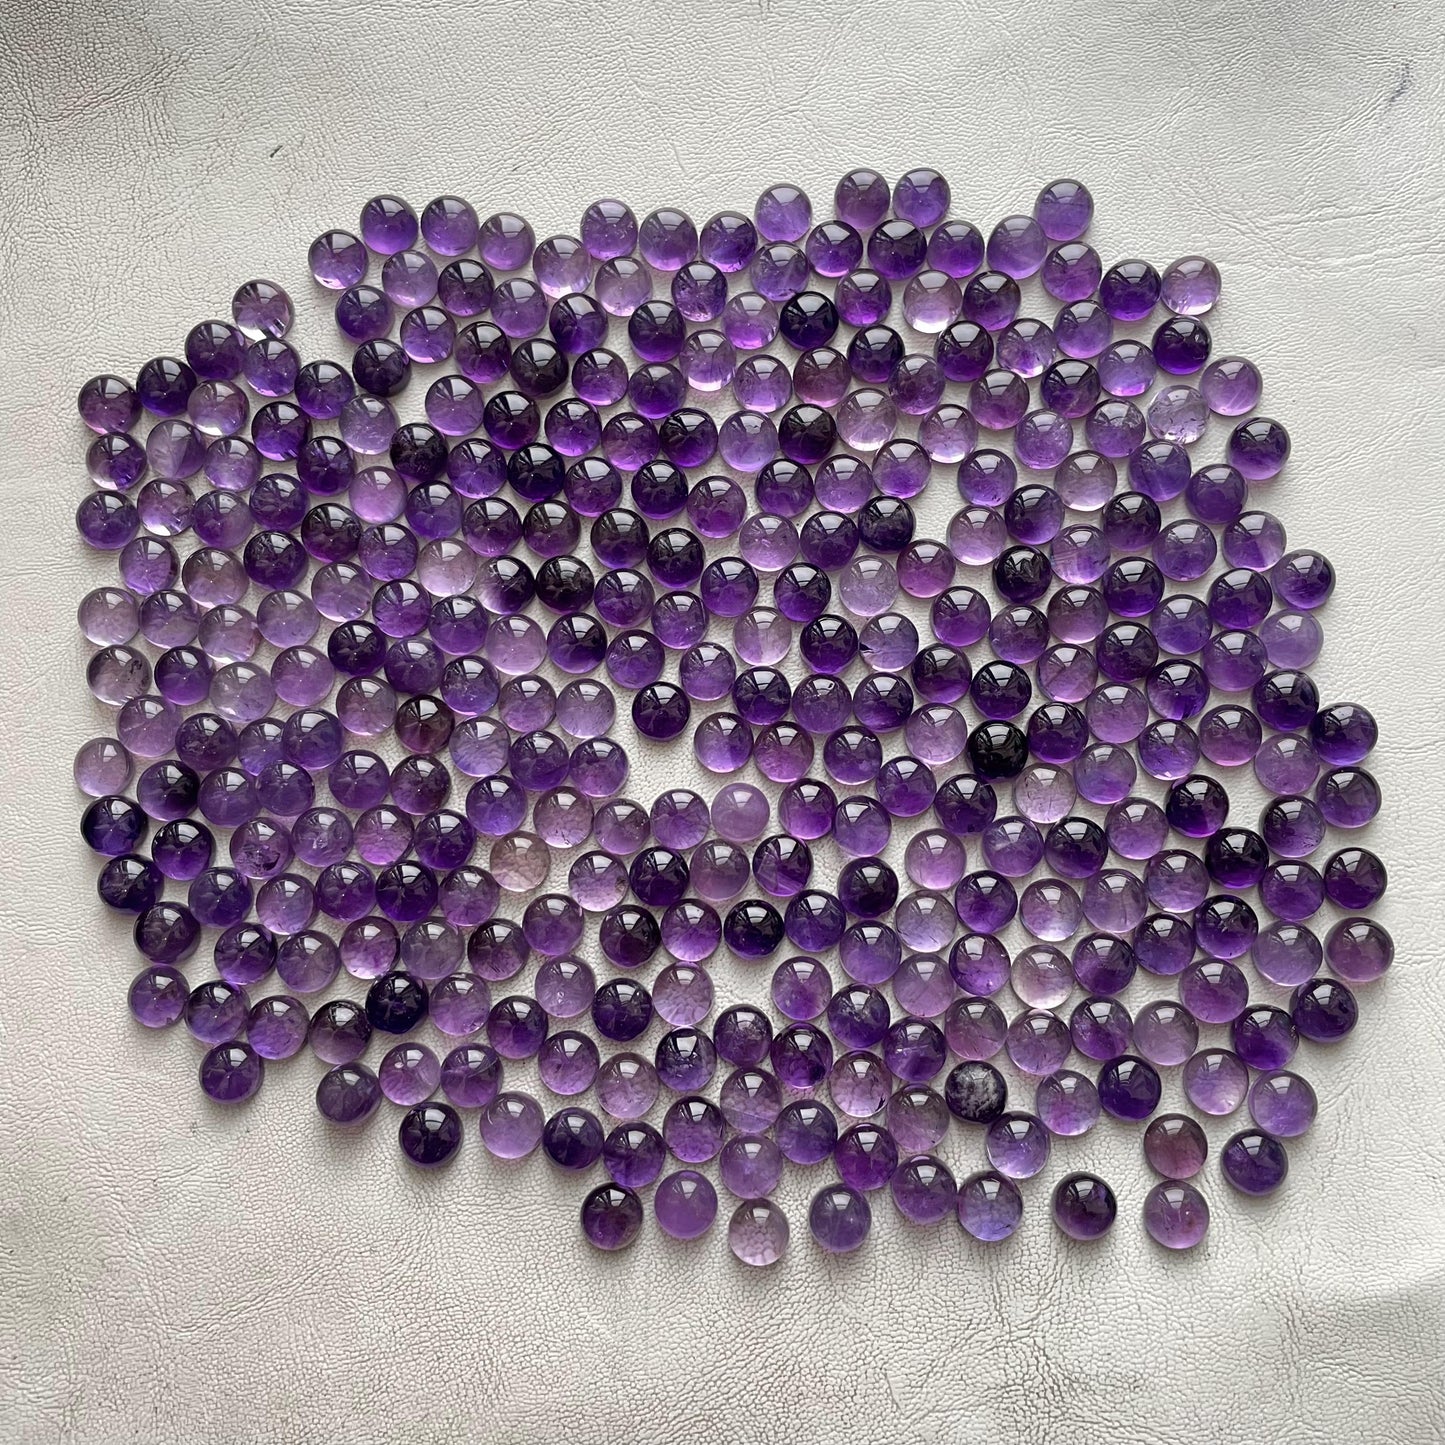 Natural Purple Amethyst 9 mm Round Cabochon